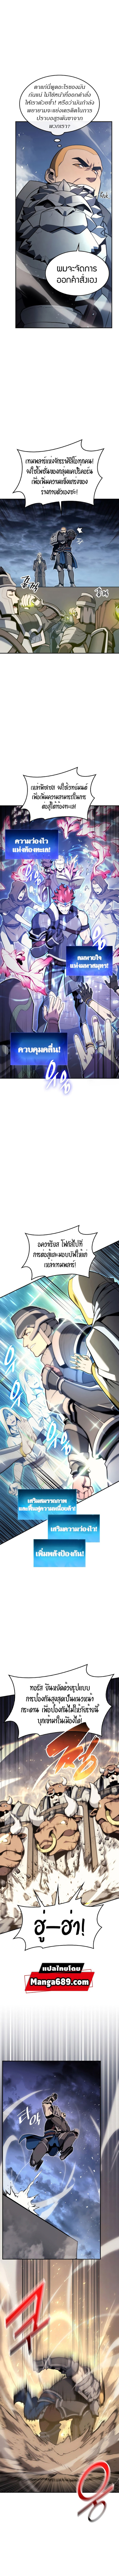 The Return of The Disaster-Class Hero - หน้า 2